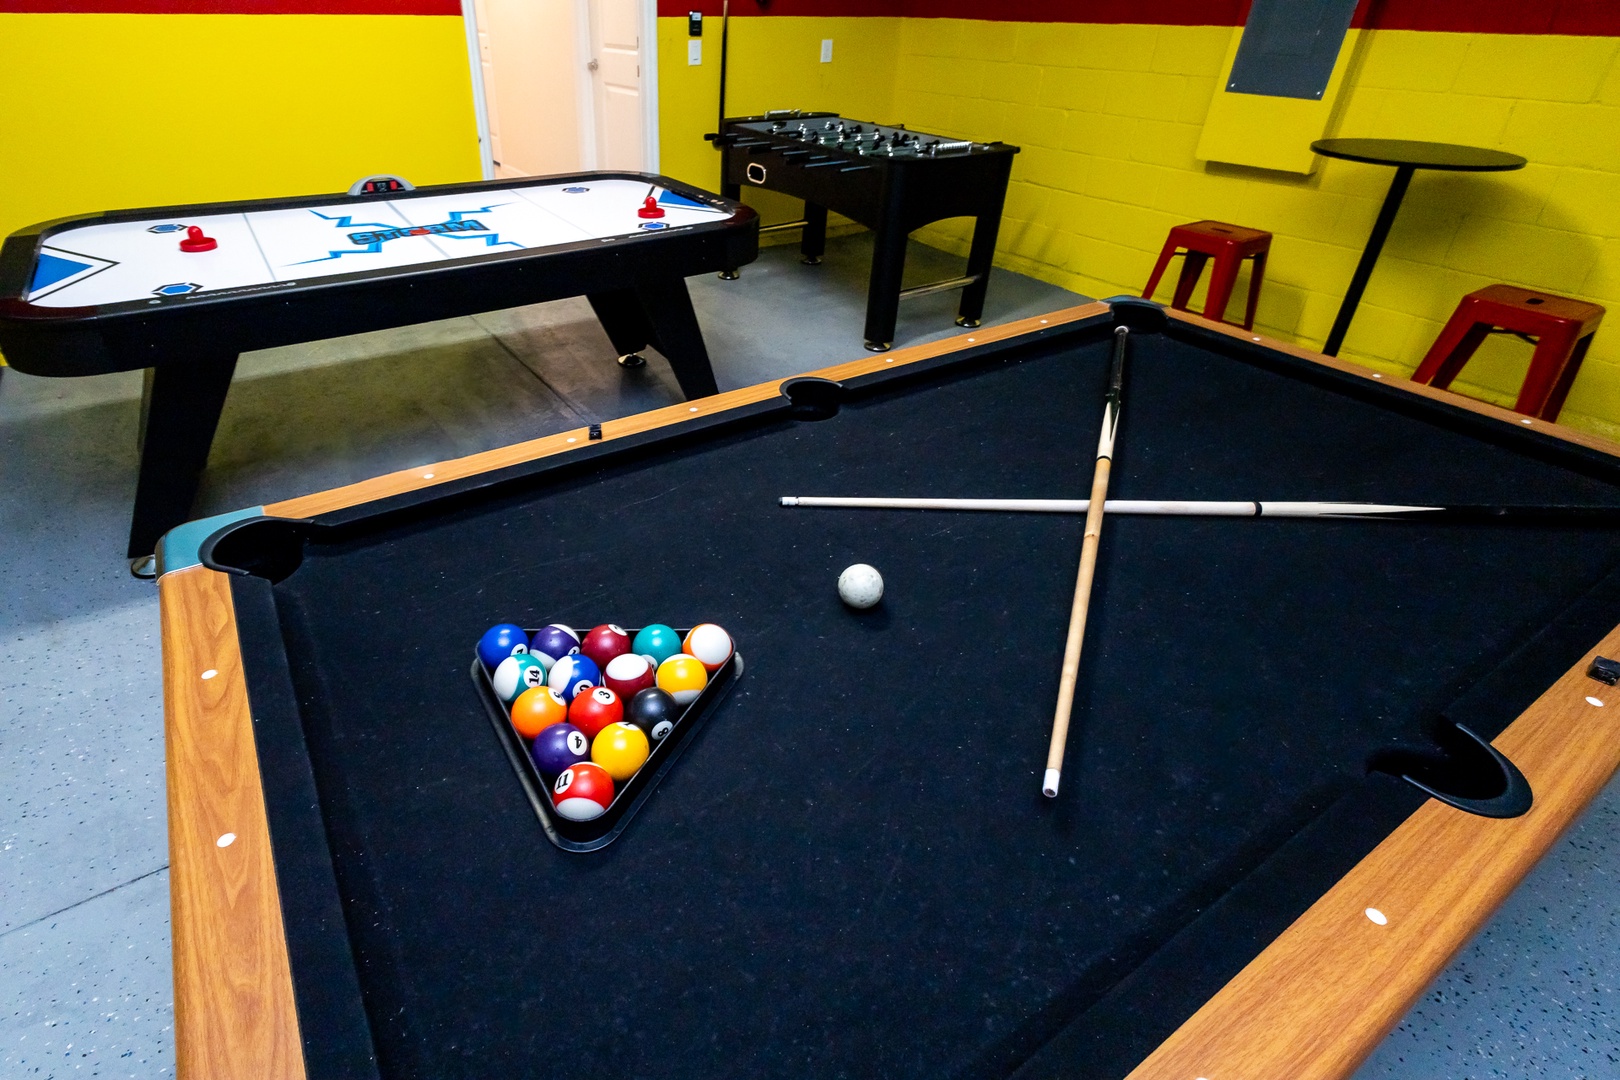 Get competitive in the garage game room with pool, air hockey, & foosball